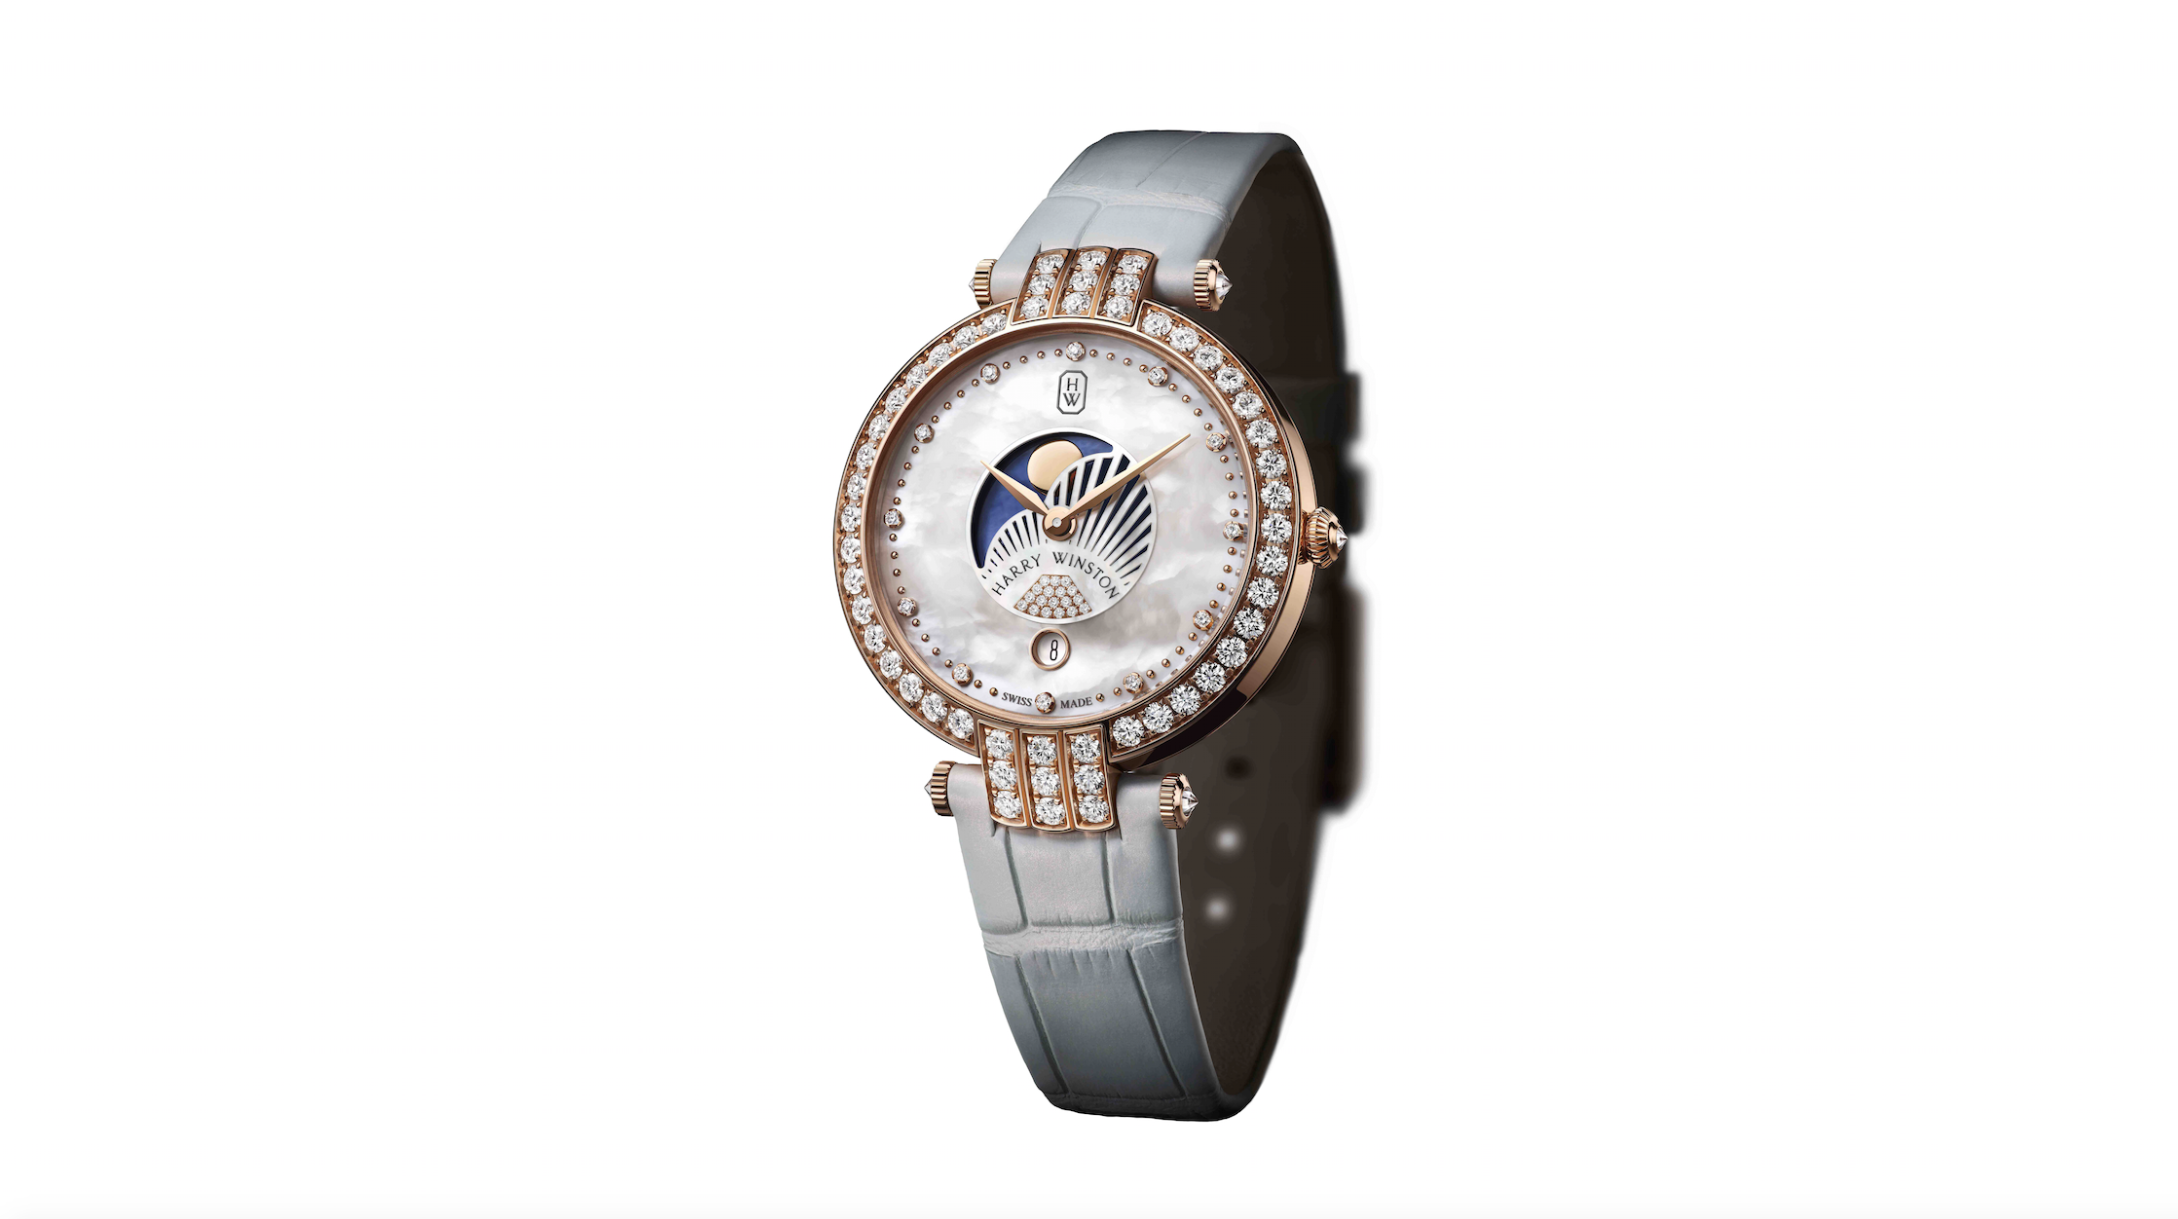 Introducing The Harry Winston Premier Moon Phase 36mm